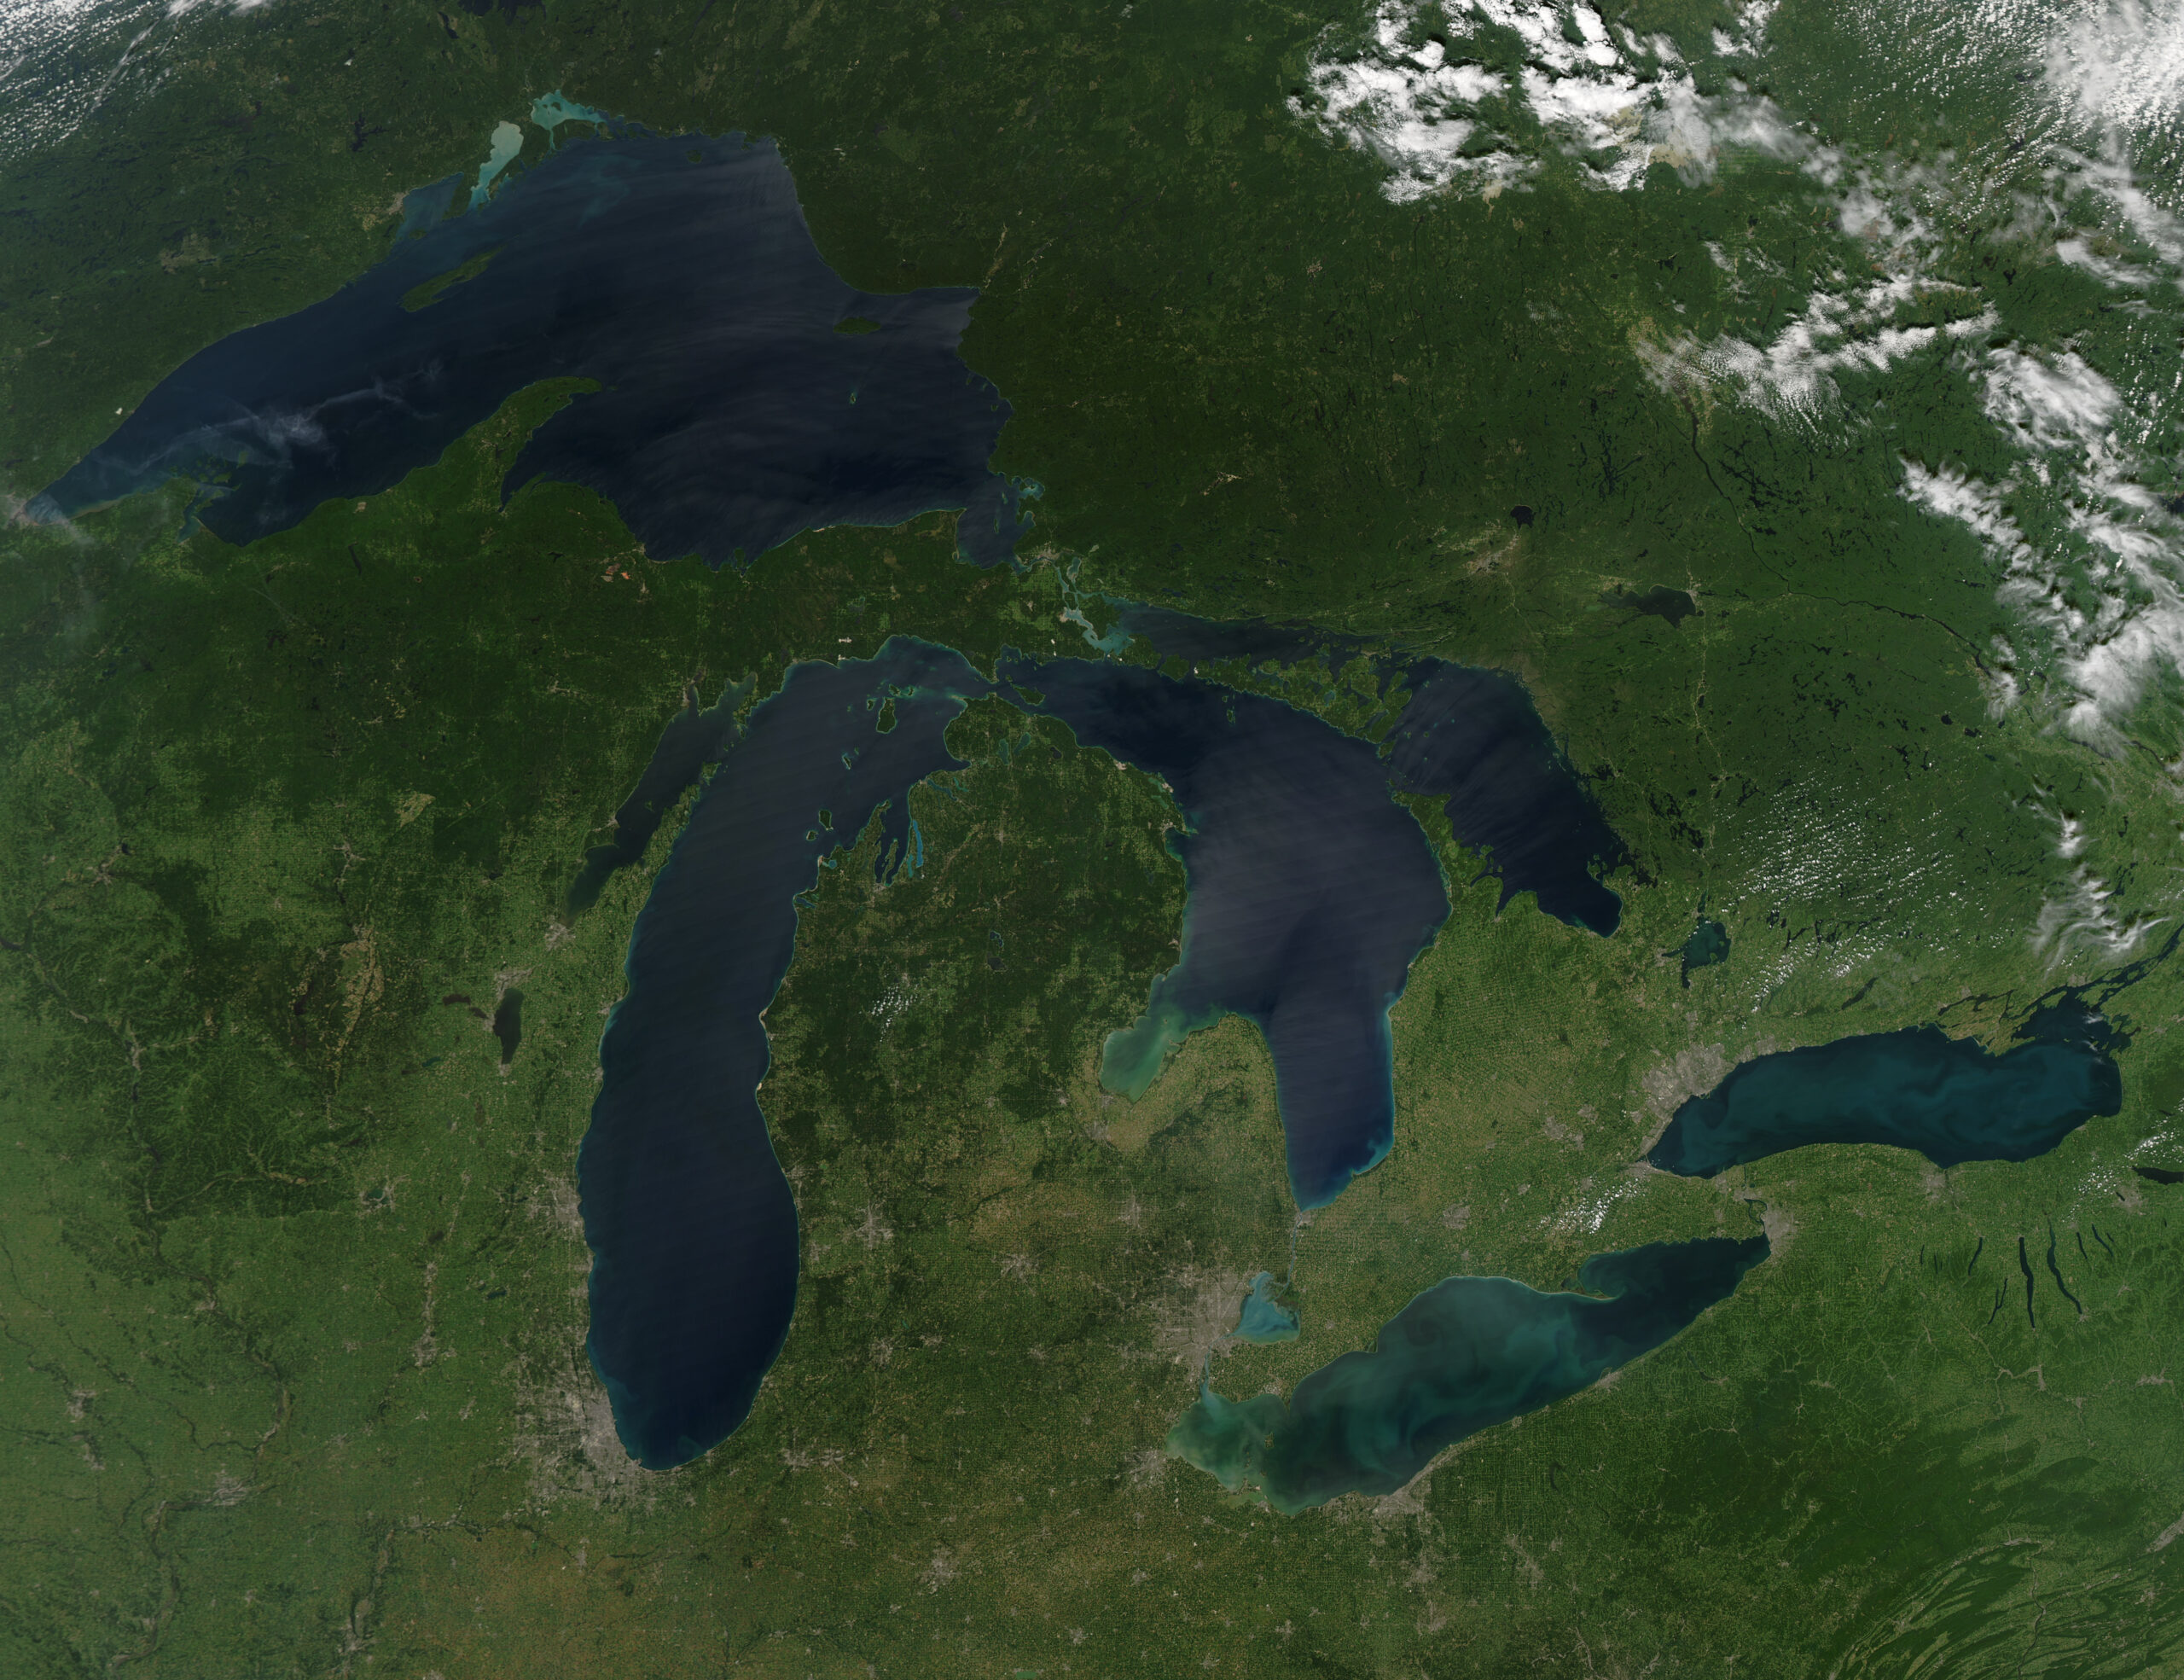 NASA image acquired August 28, 2010 of the Great Lakes.